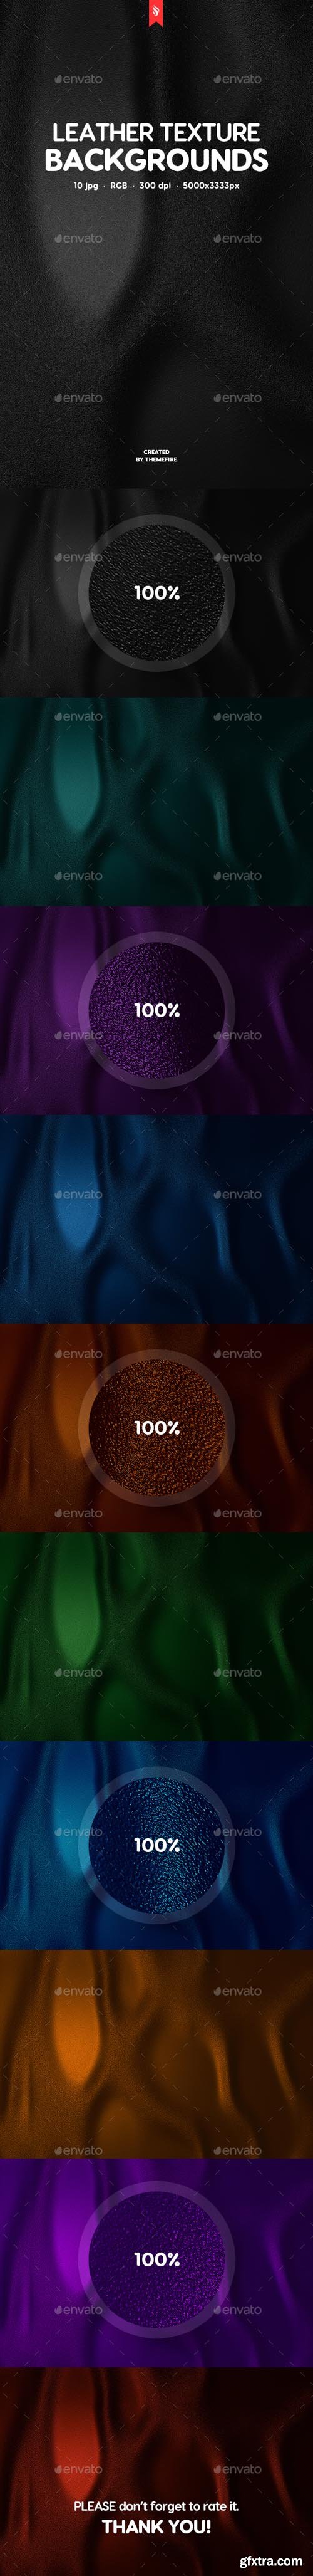 GR - Leather Texture Backgrounds 19788203